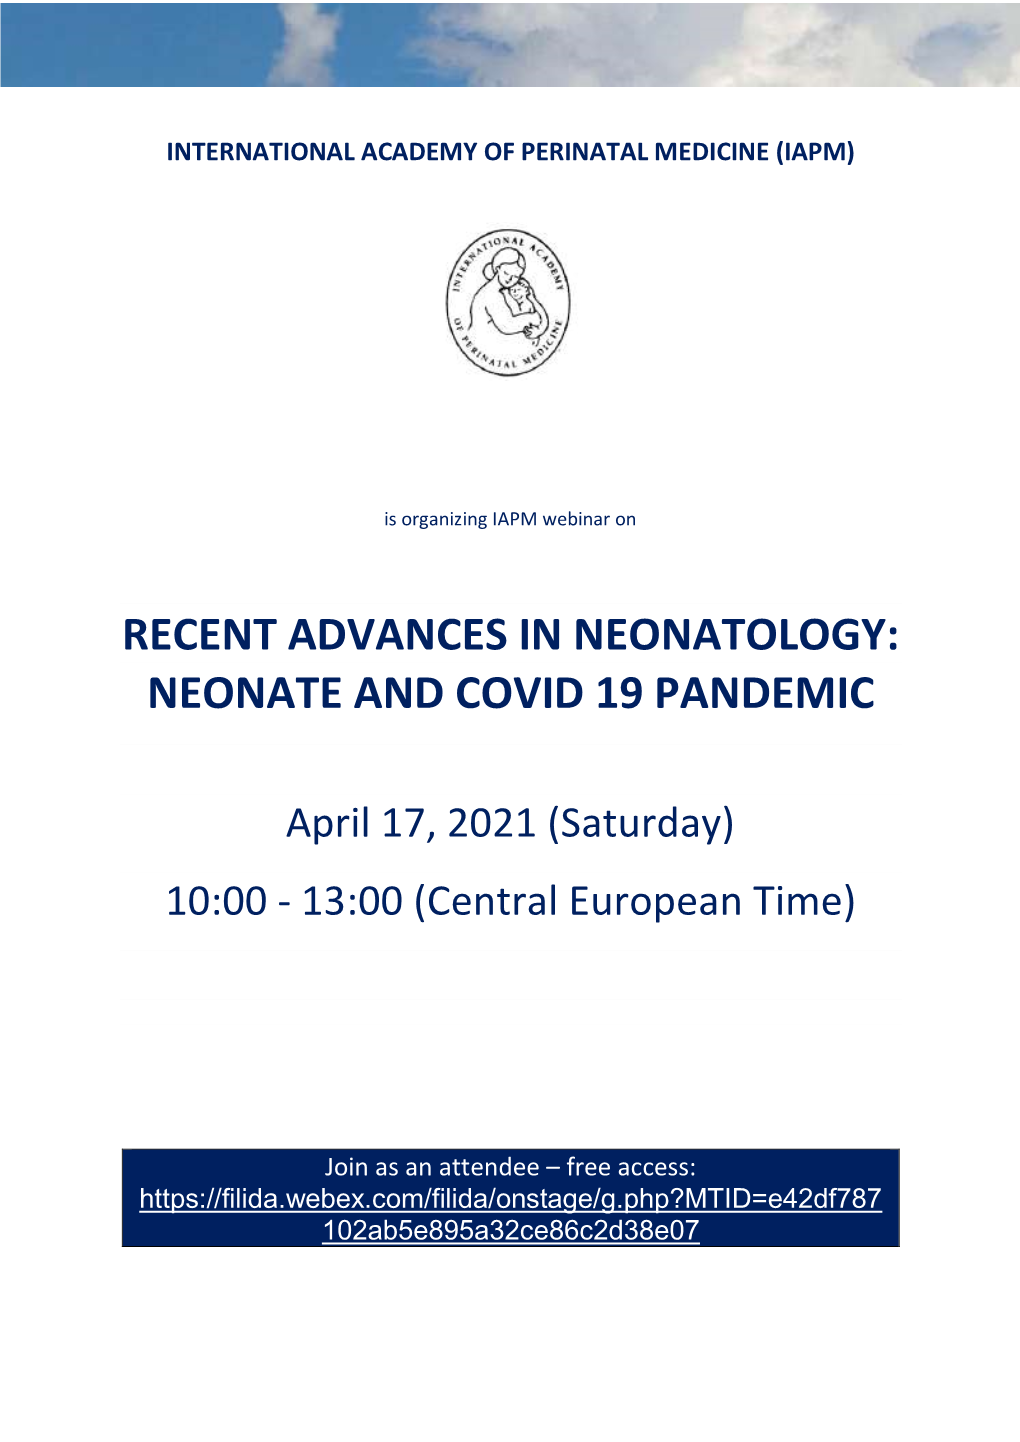 Neonate and Covid 19 Pandemic